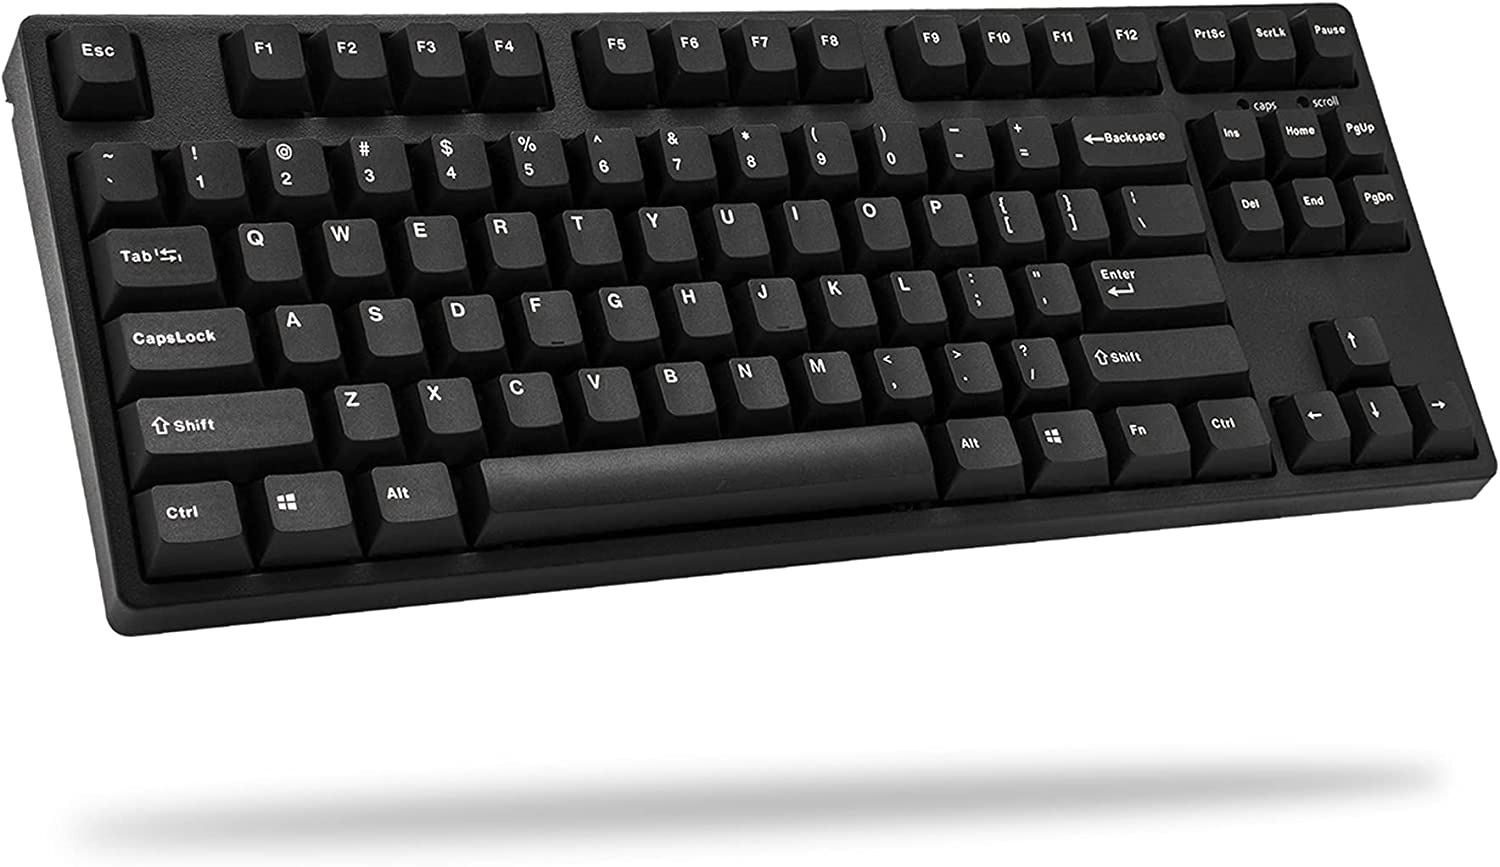 CD87 V2 Ergonomic Mechanical Keyboard with Cherry MX Red Switch for Windows and 